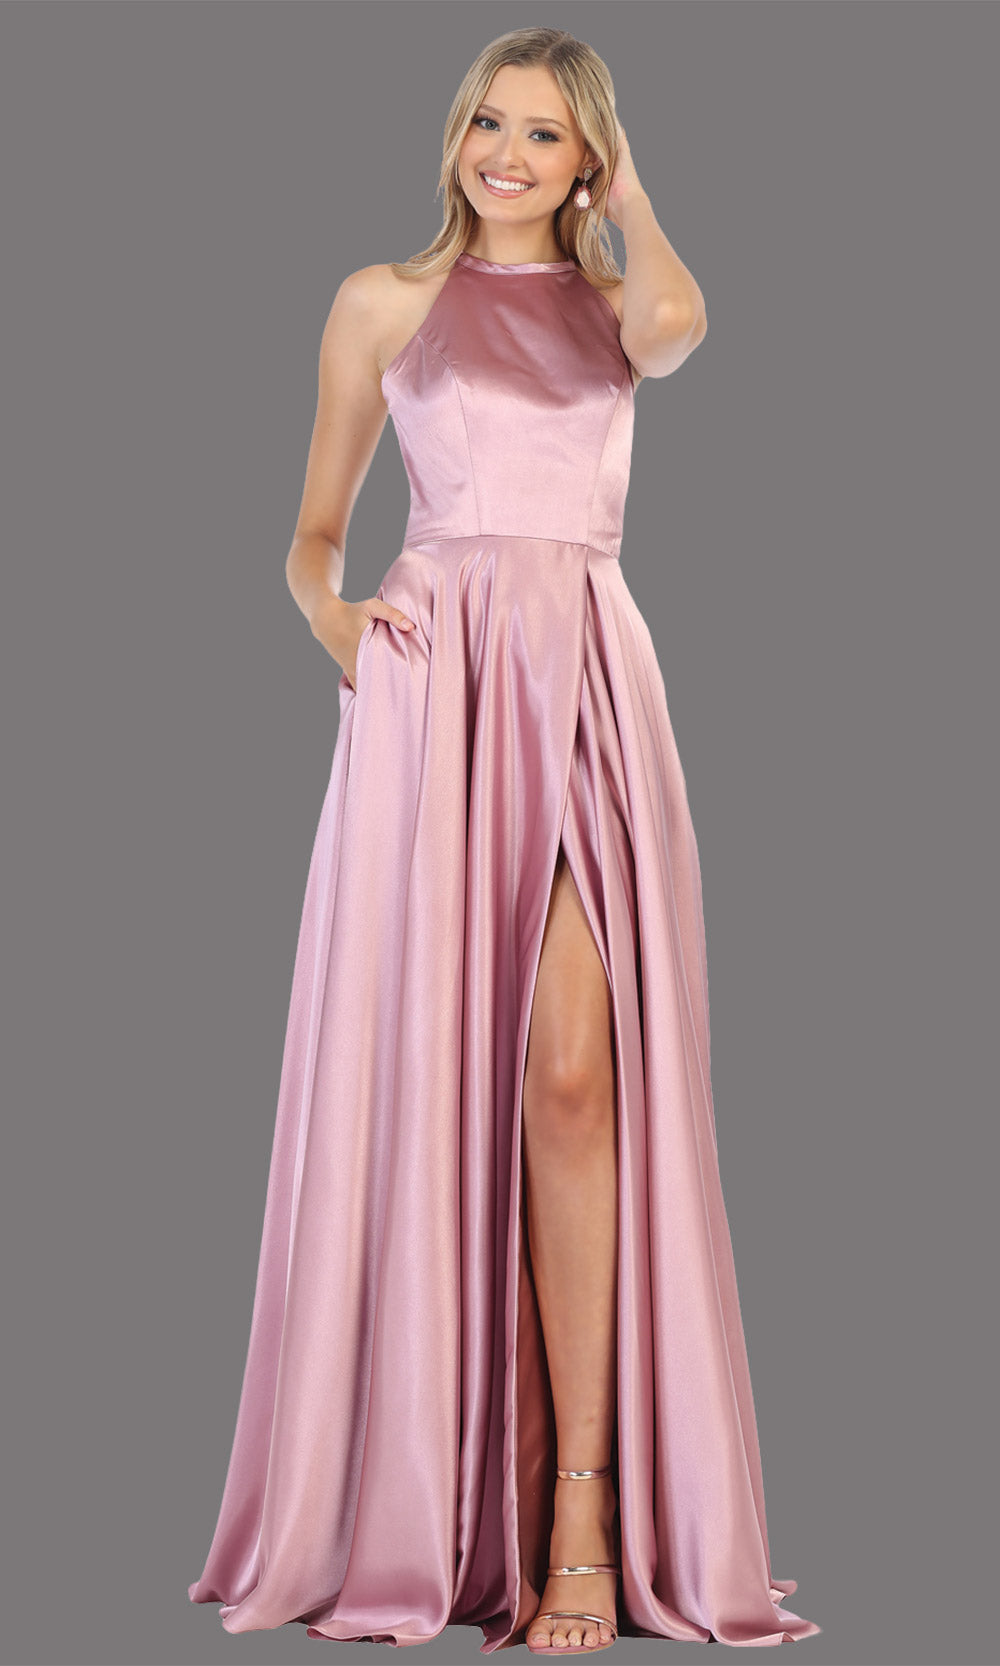 Mayqueen MQ1733 long mauve pink satin high neck dress w/low back & high slit. This light pink formal evening dress is perfect for bridesmaid dresses, prom, wedding guest dress, evening party dress. Plus sizes avail